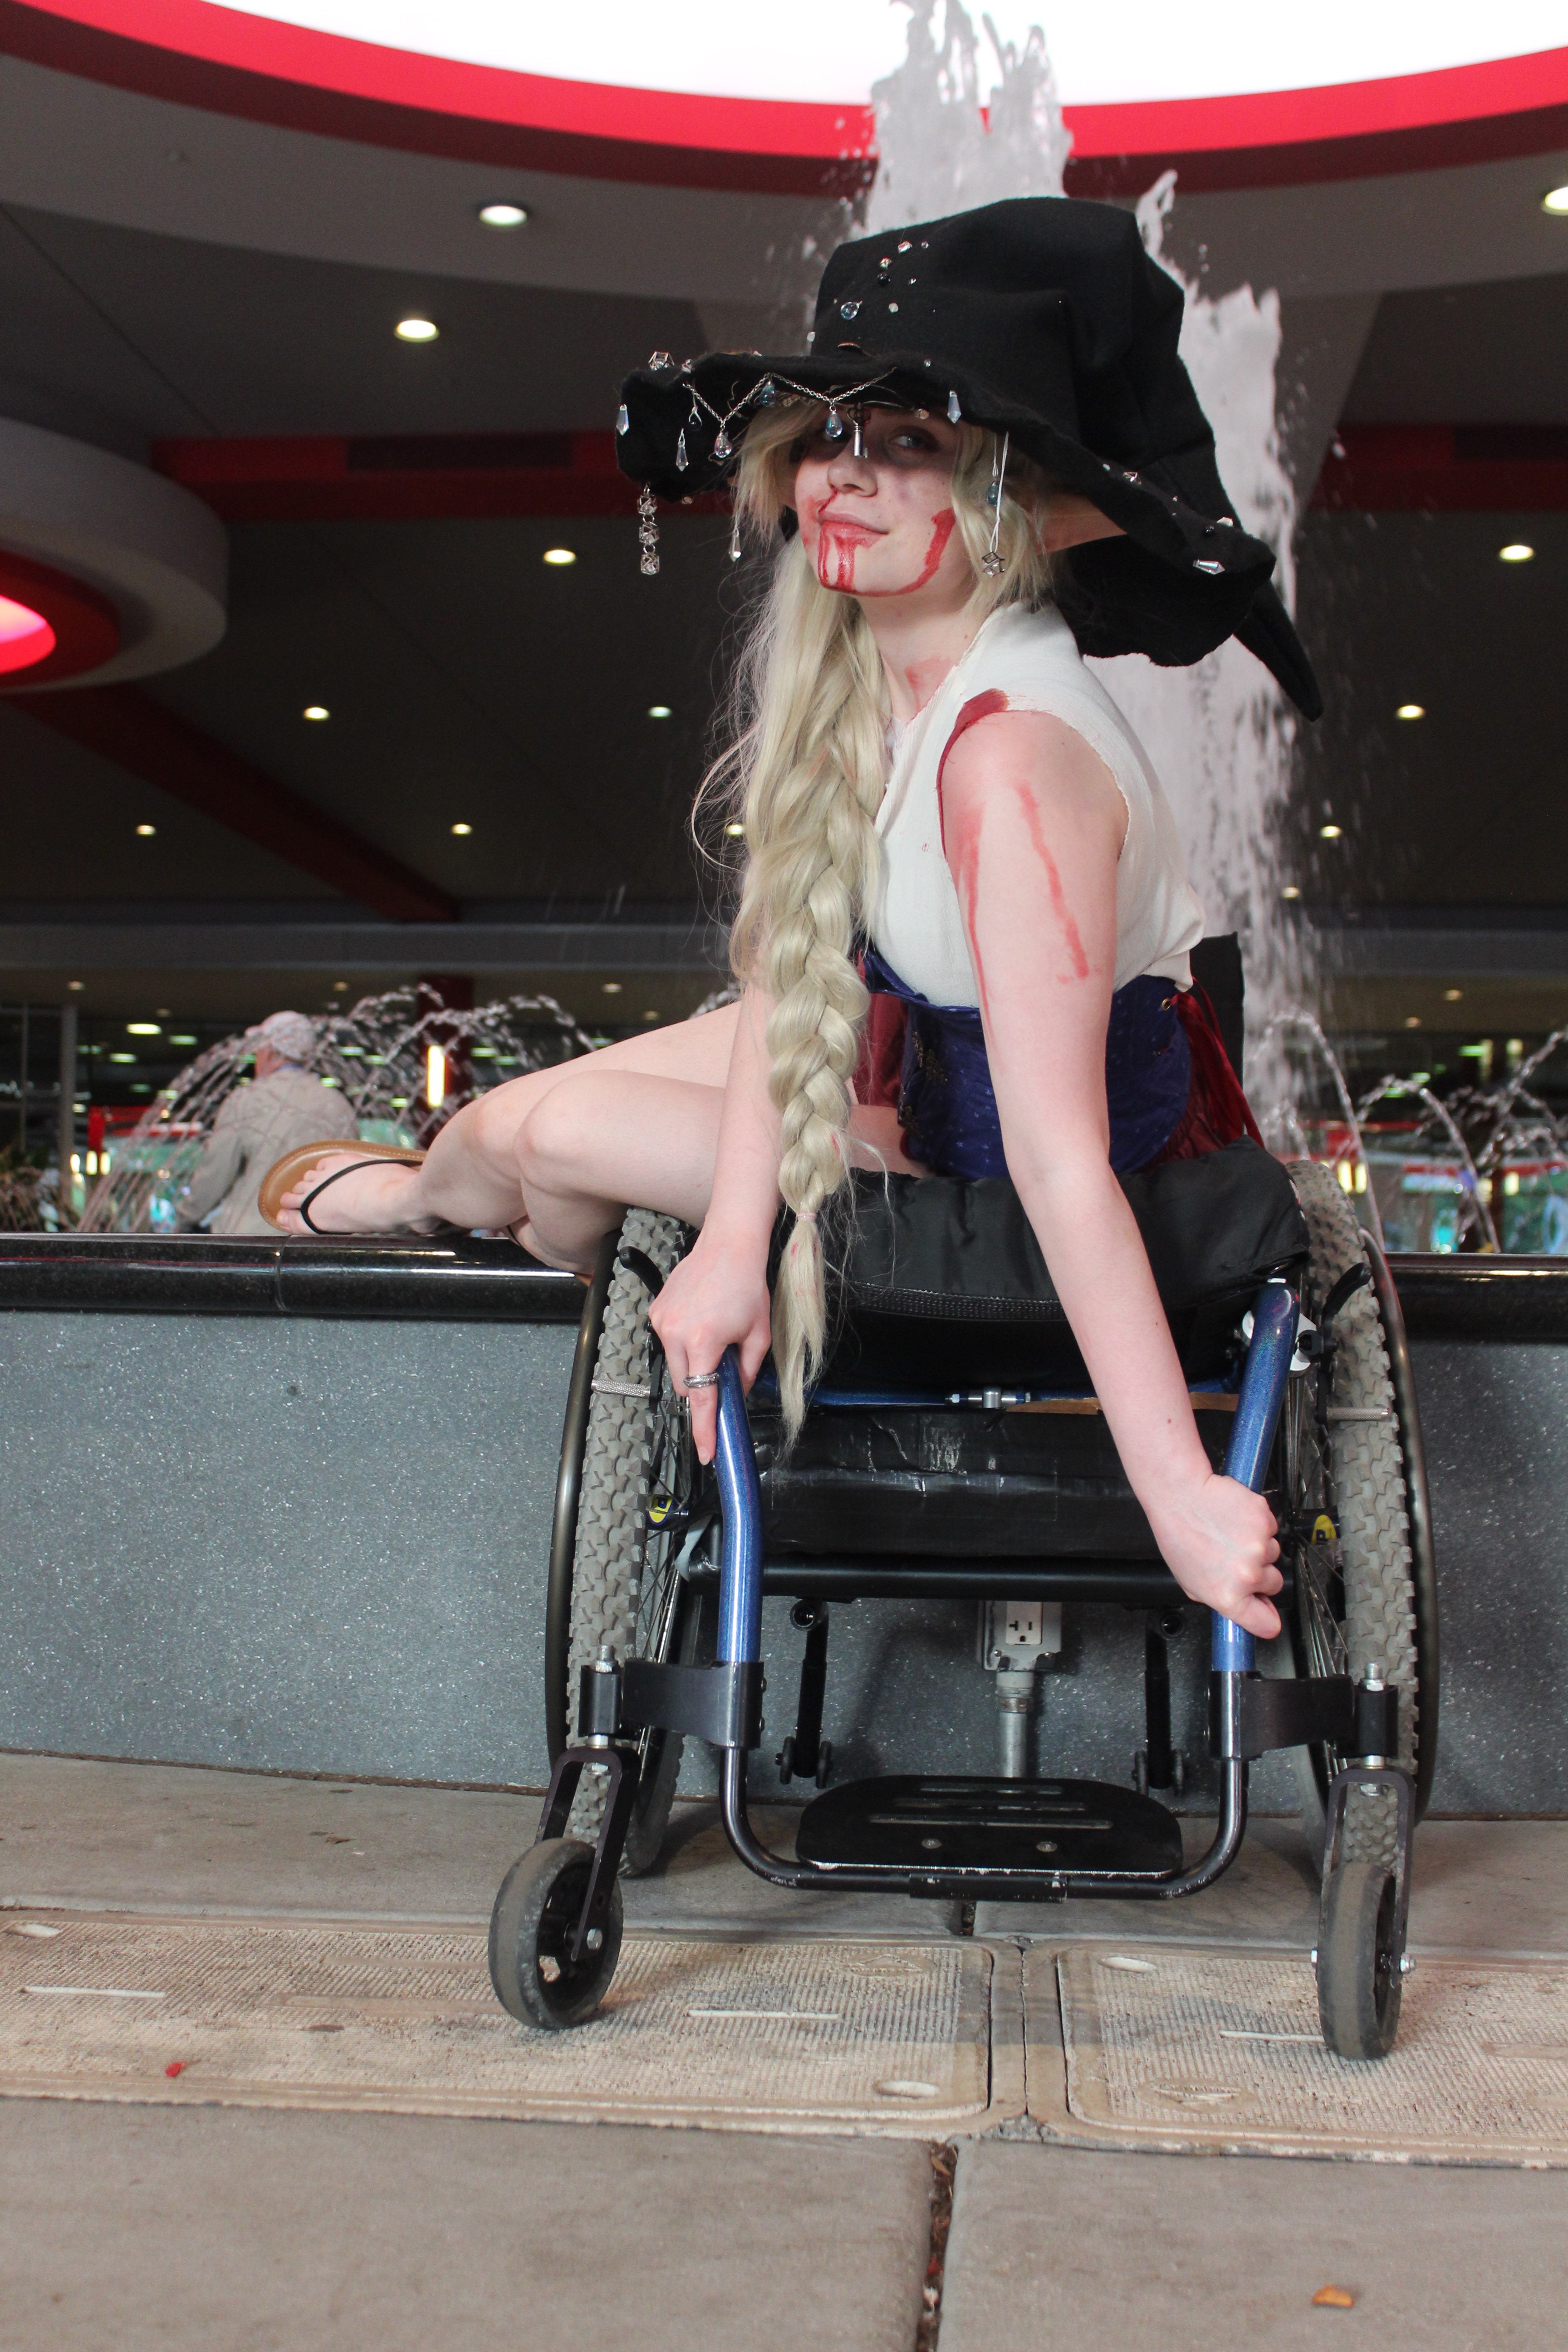 Disability in Cosplay and Representation in Media